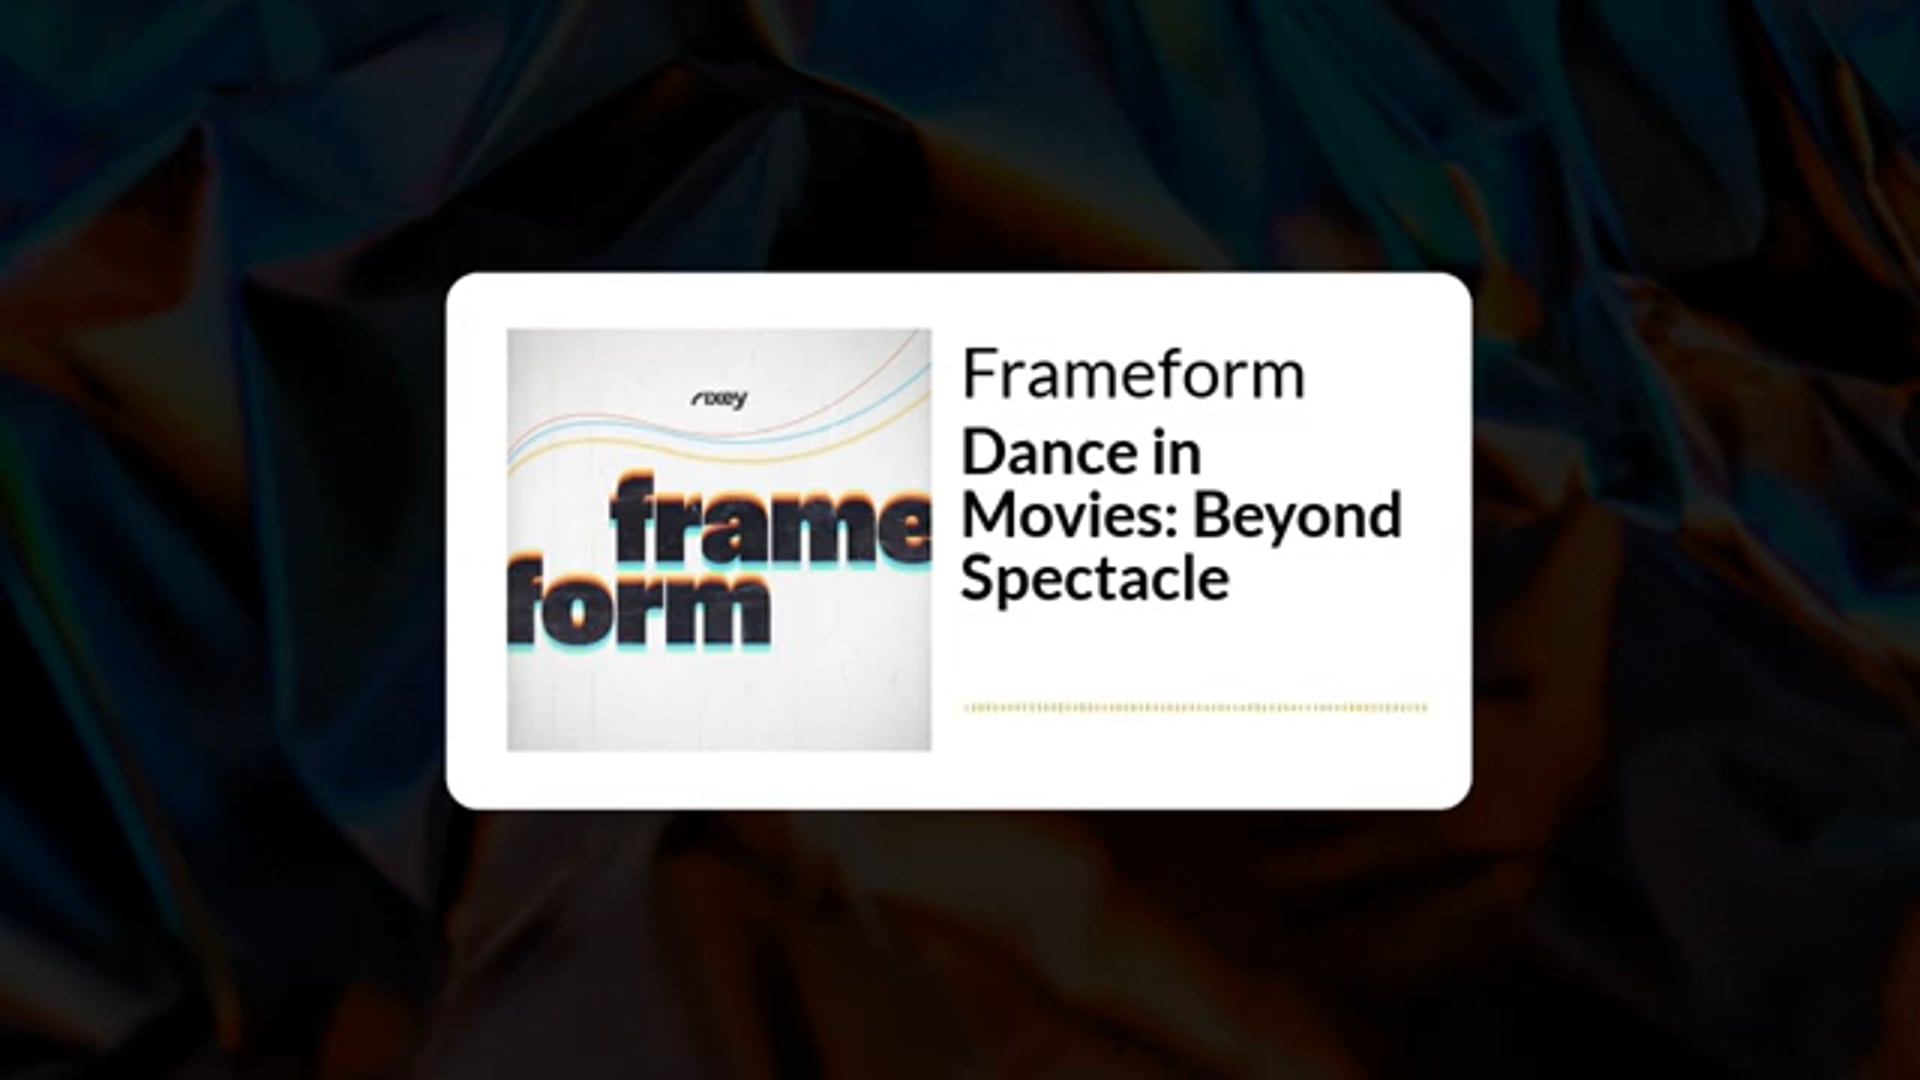 Frameform Episode 20: Dance in Movies Beyond Spectacle